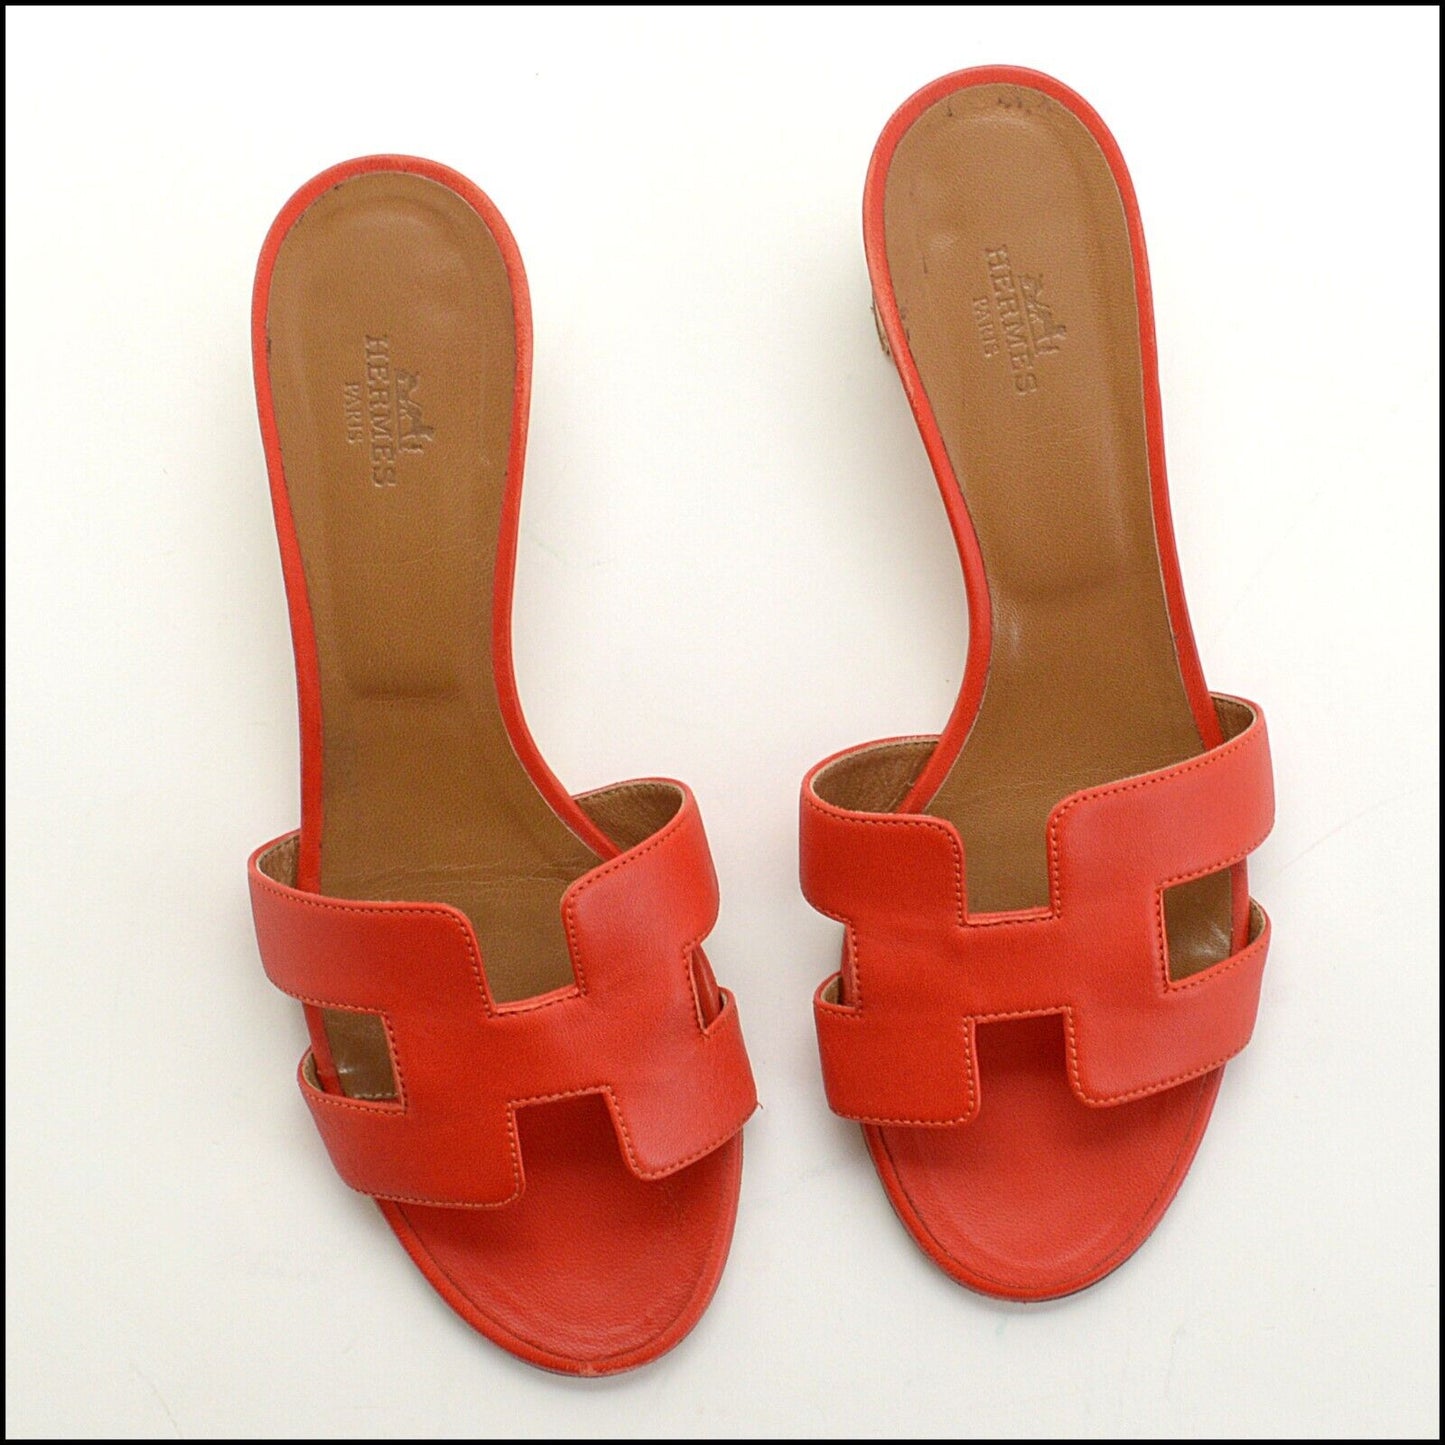 RDC13832 Authentic HERMES Red / Orange Leather Oasis Sandals Size 8